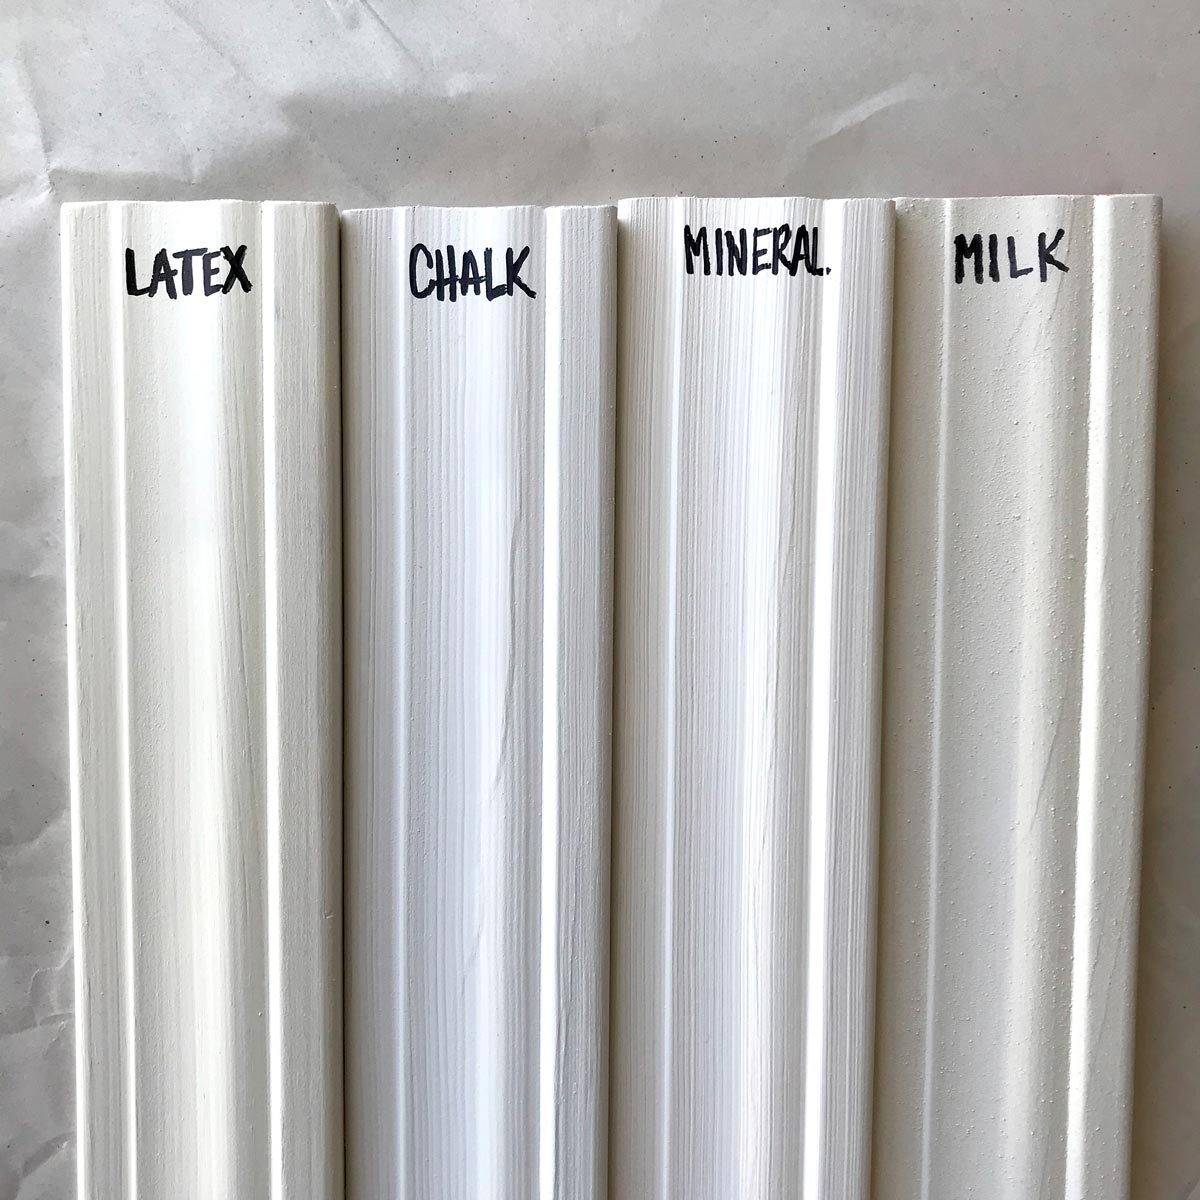 Chalk Paint, Milk, Mineral or Latex—Which Paint is Best for Your Refinishing Project?